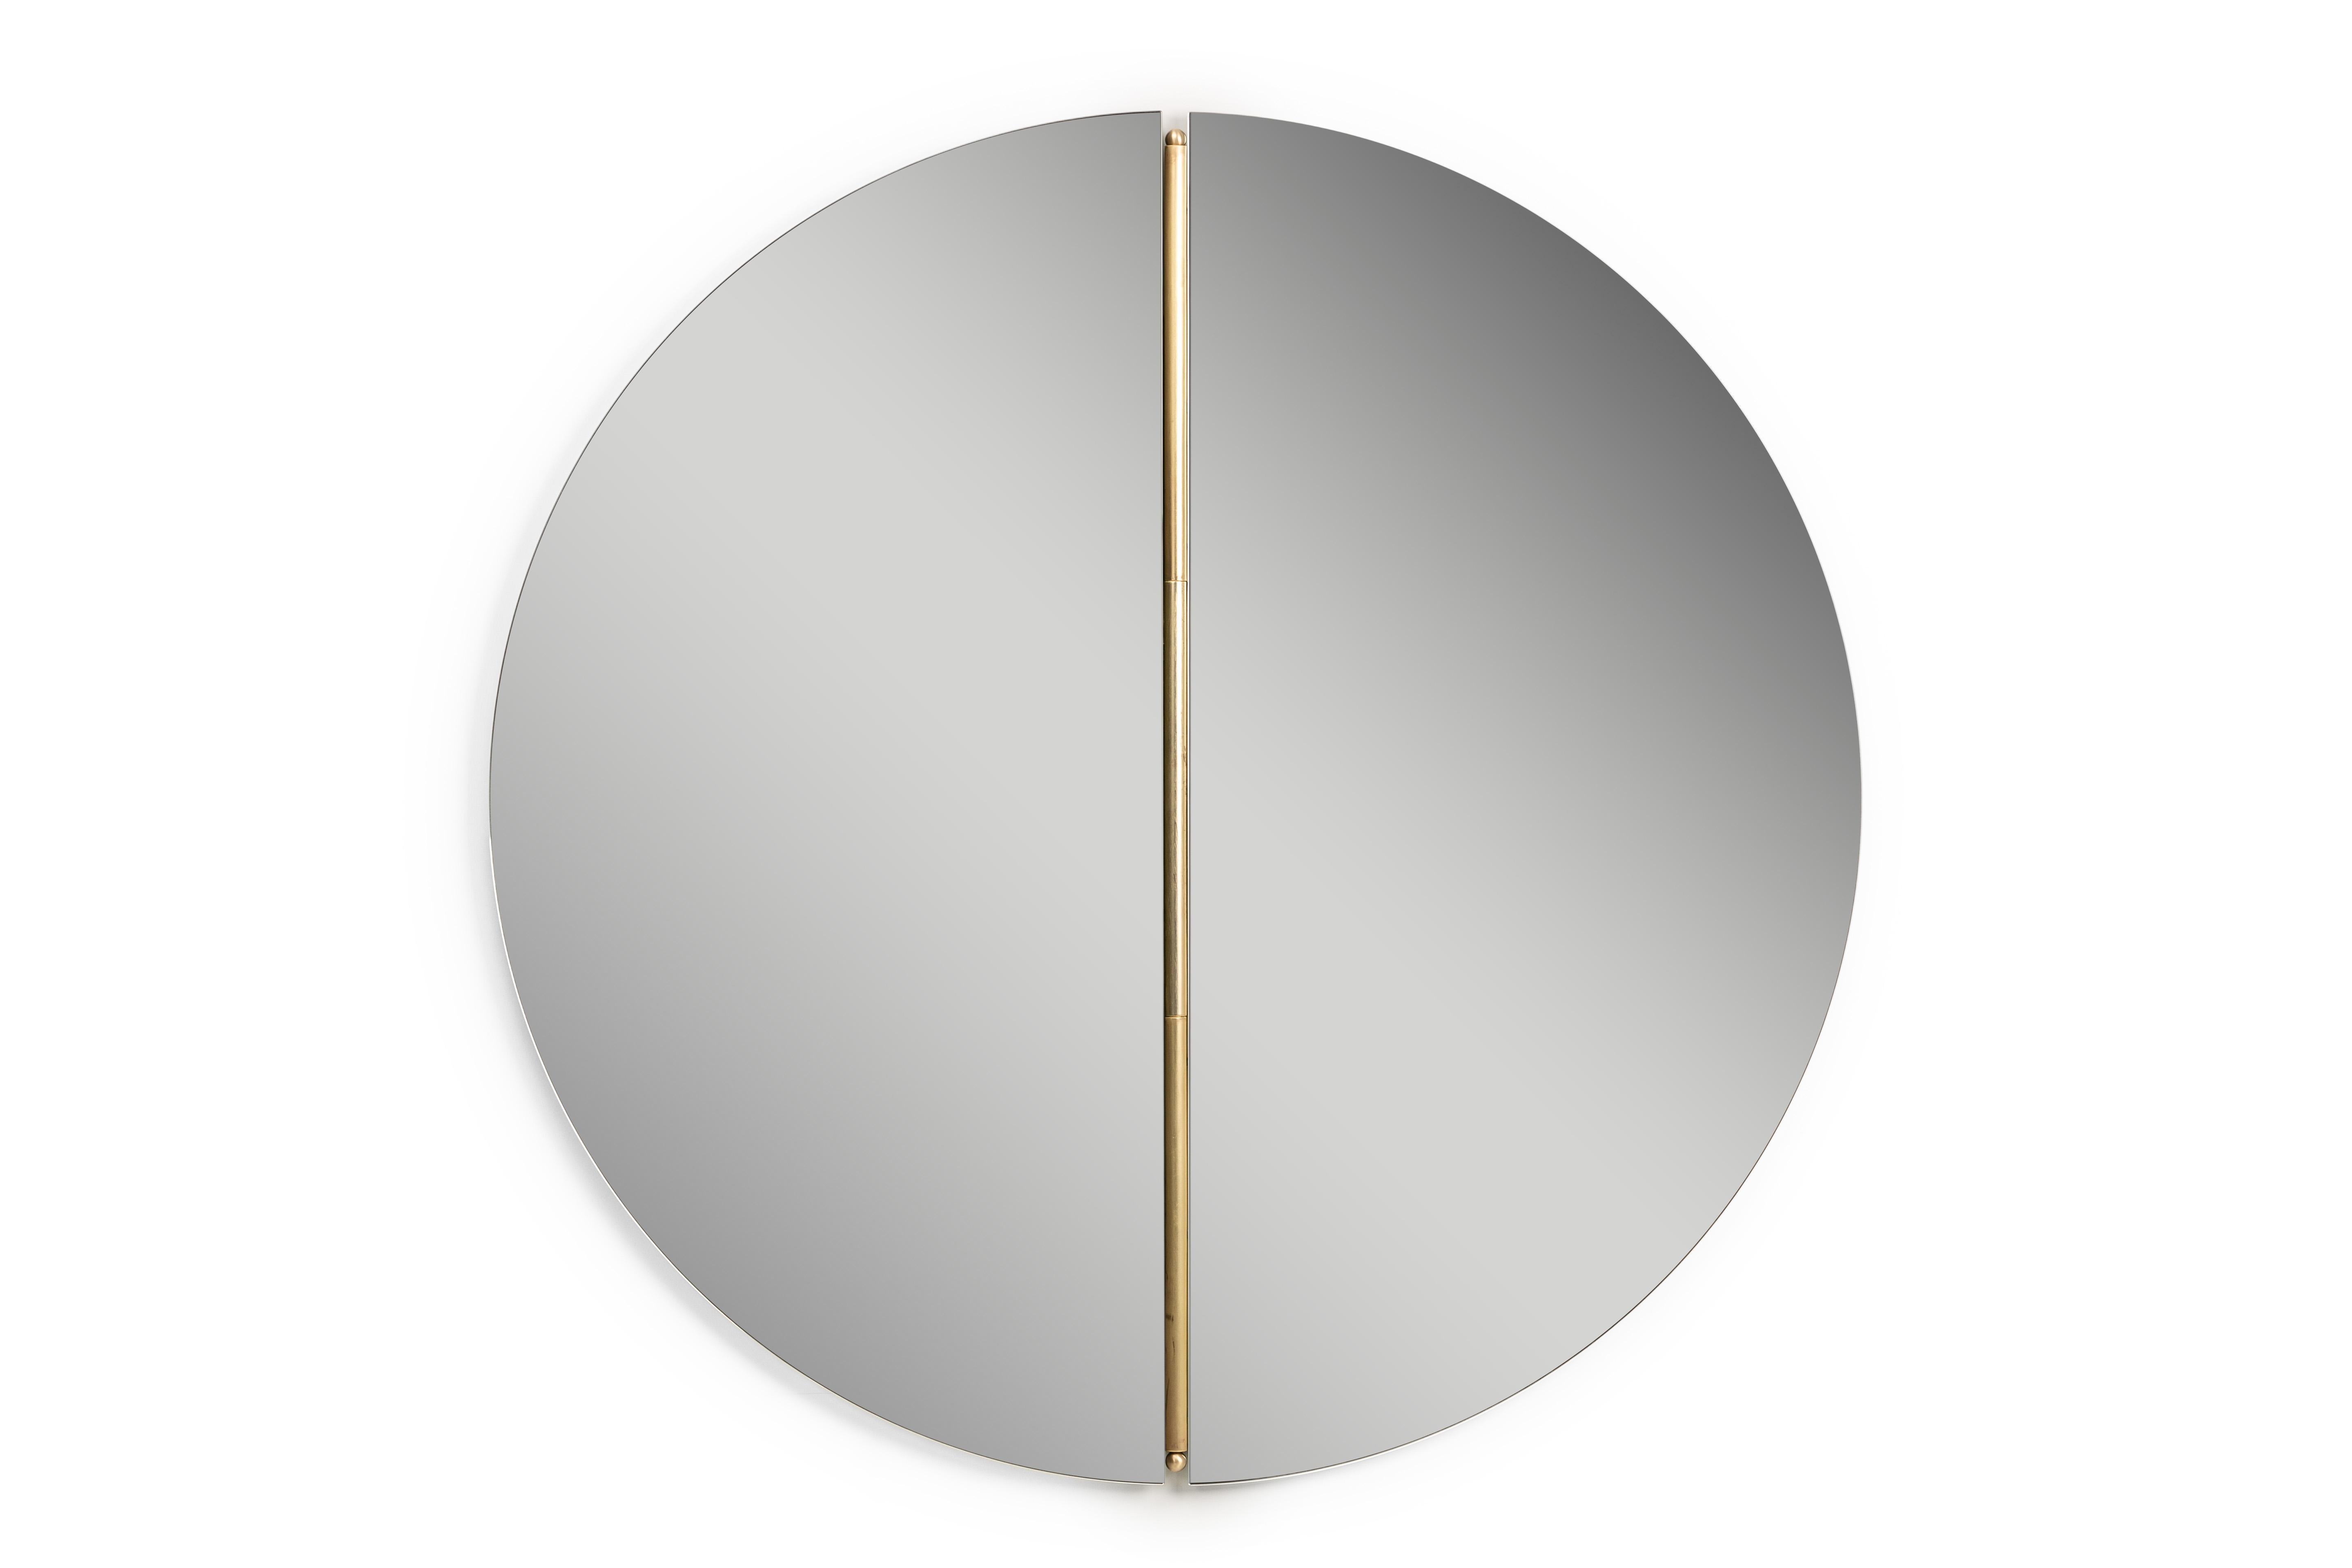 Rondò mirror by Mingardo
Dimensions: D100 x H 100 cm 
Materials: Matt brass plated stainless steel structure
Weight: 40 kg

Also Available in different dimensions.

Rondò reinterprets the classic round mirror to adapt it to any domestic